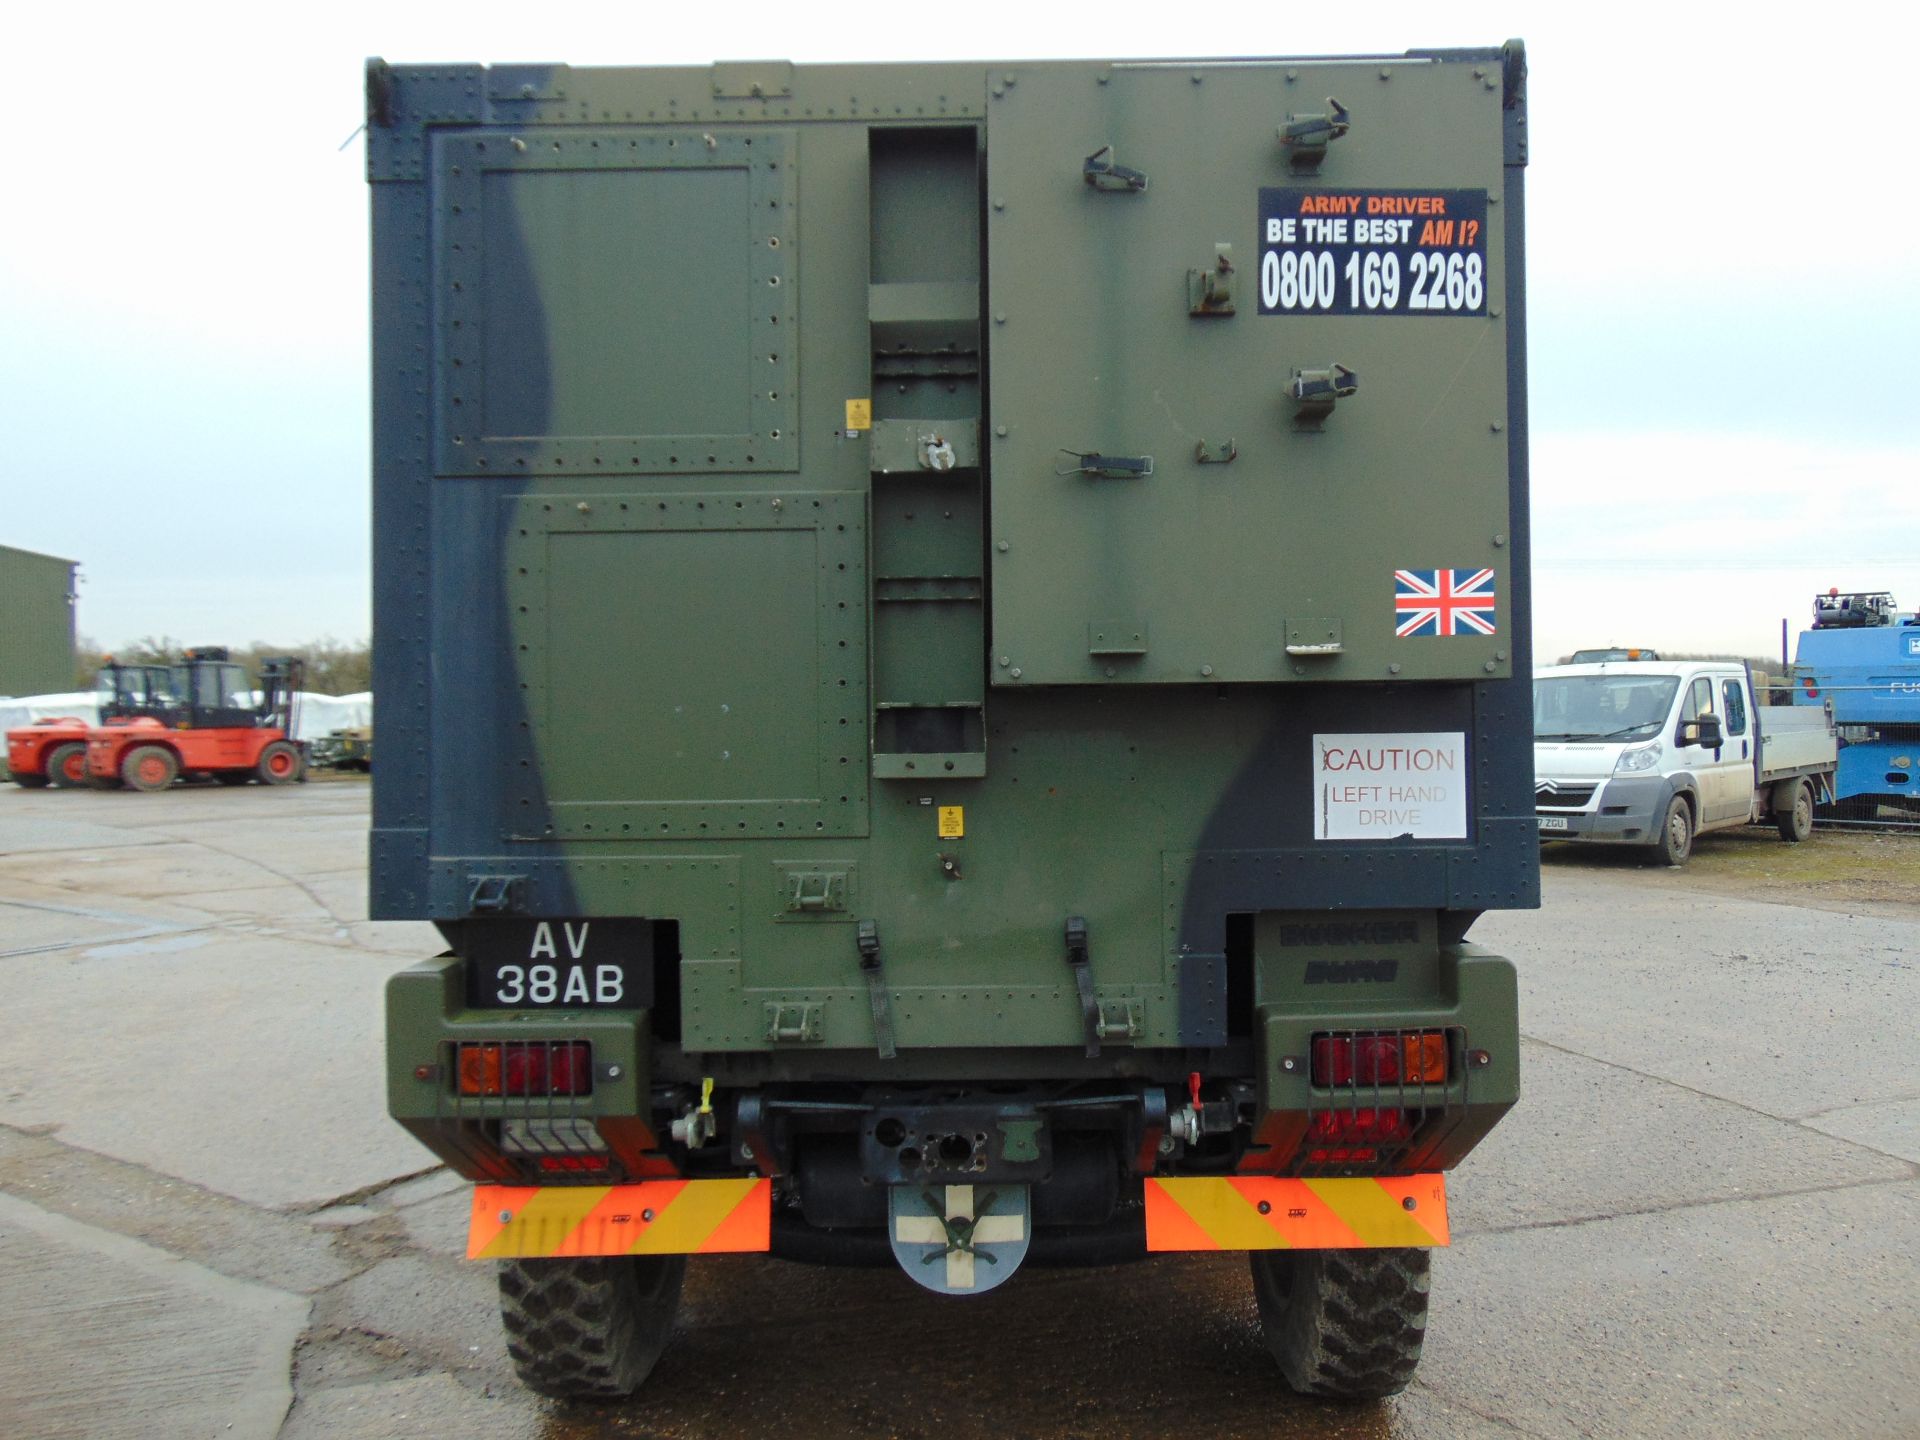 Ex Reserve Left Hand Drive Mowag Bucher Duro II 6x6 High-Mobility Tactical Vehicle - Image 7 of 17